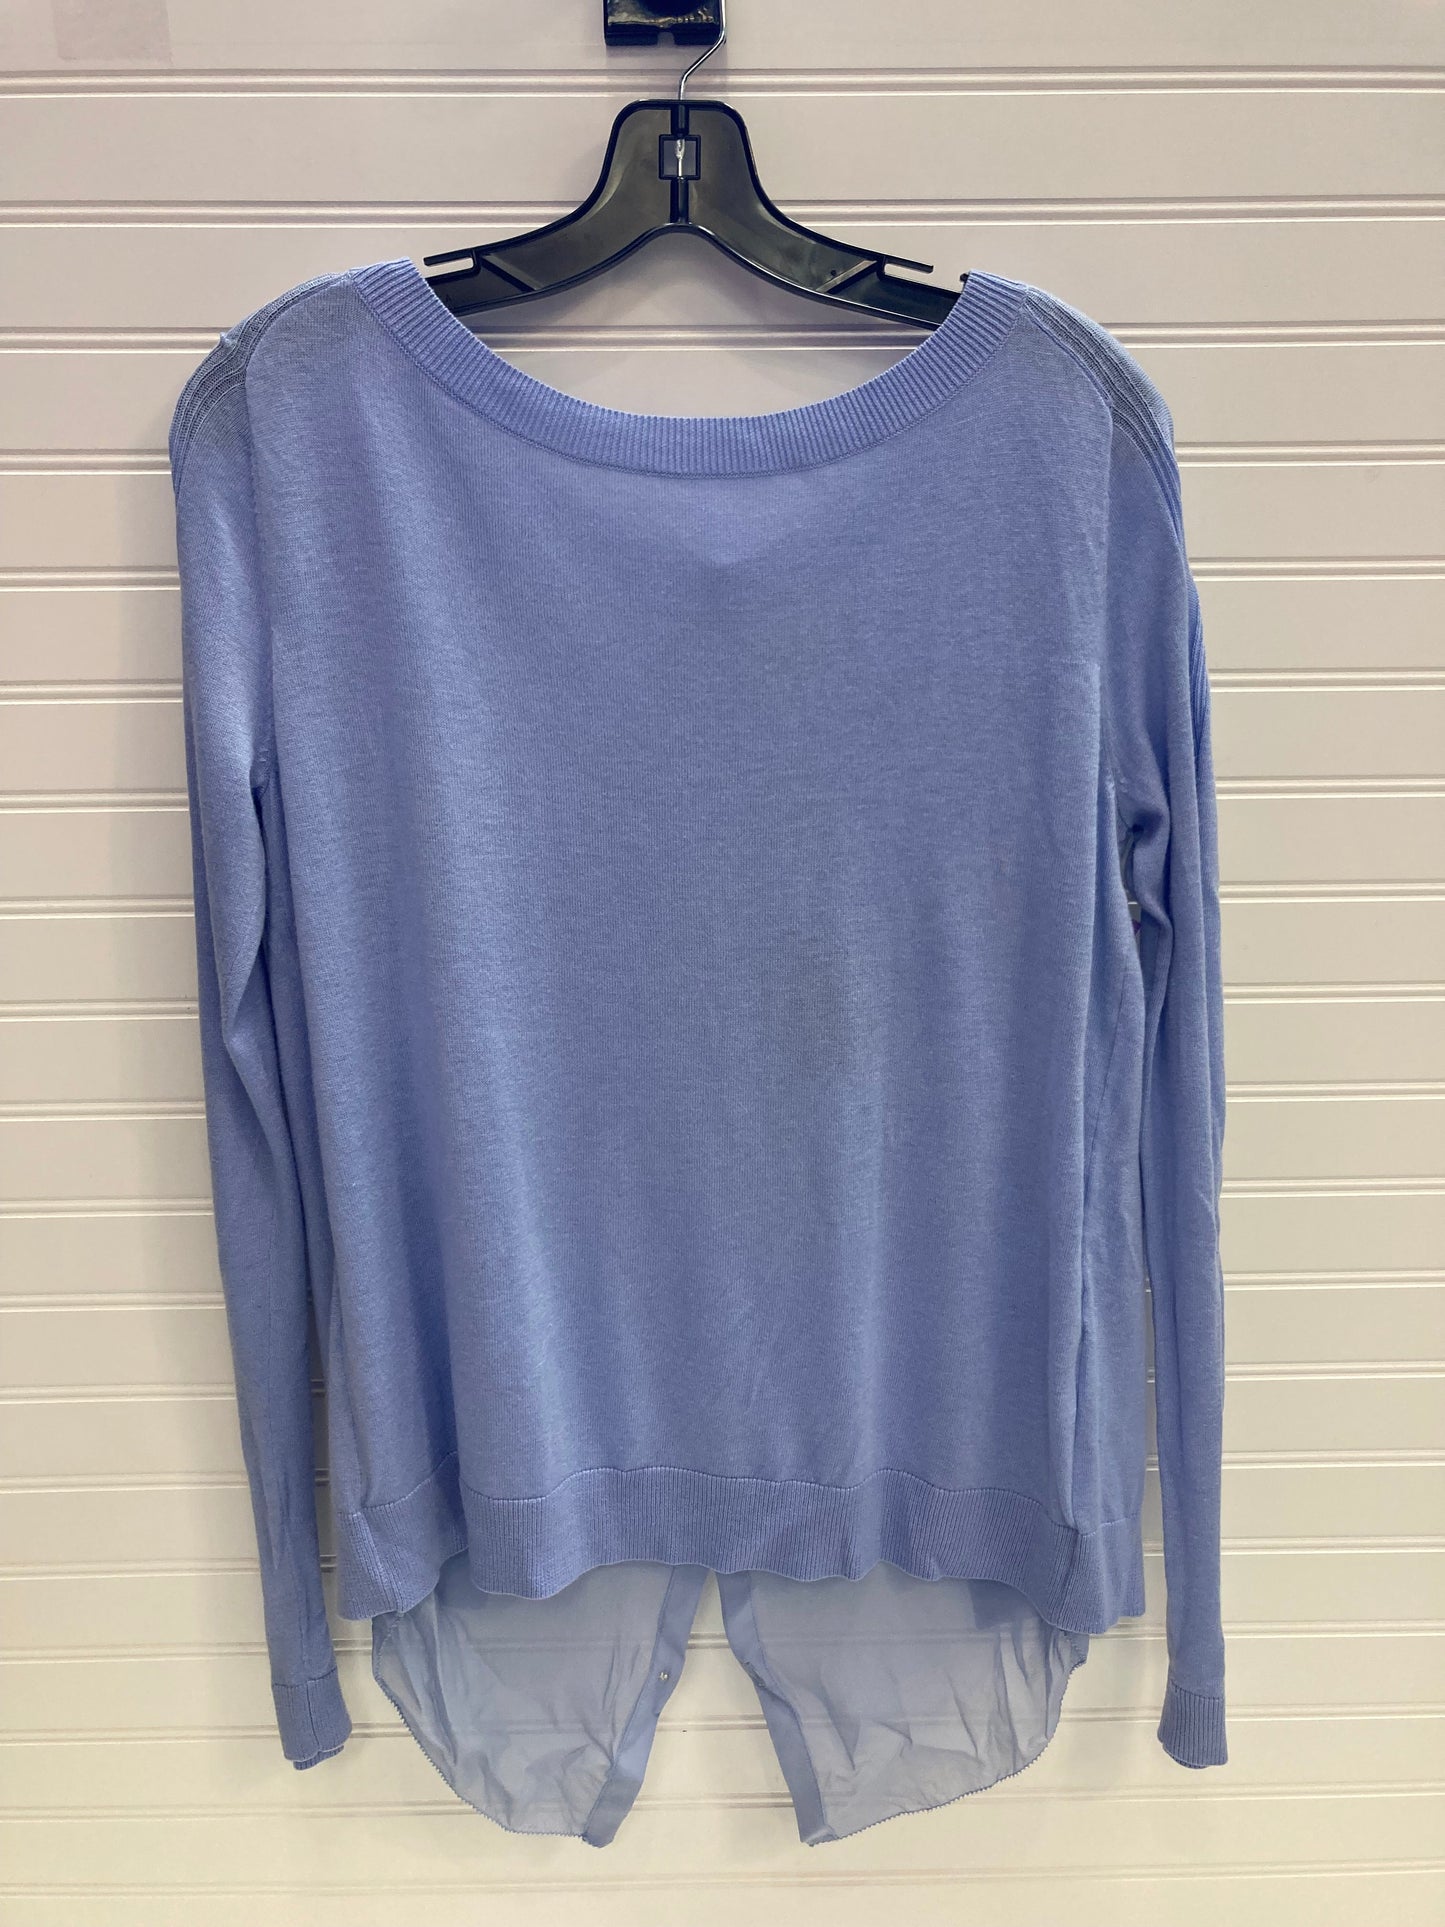 Blue Top Long Sleeve Halston Heritage, Size S